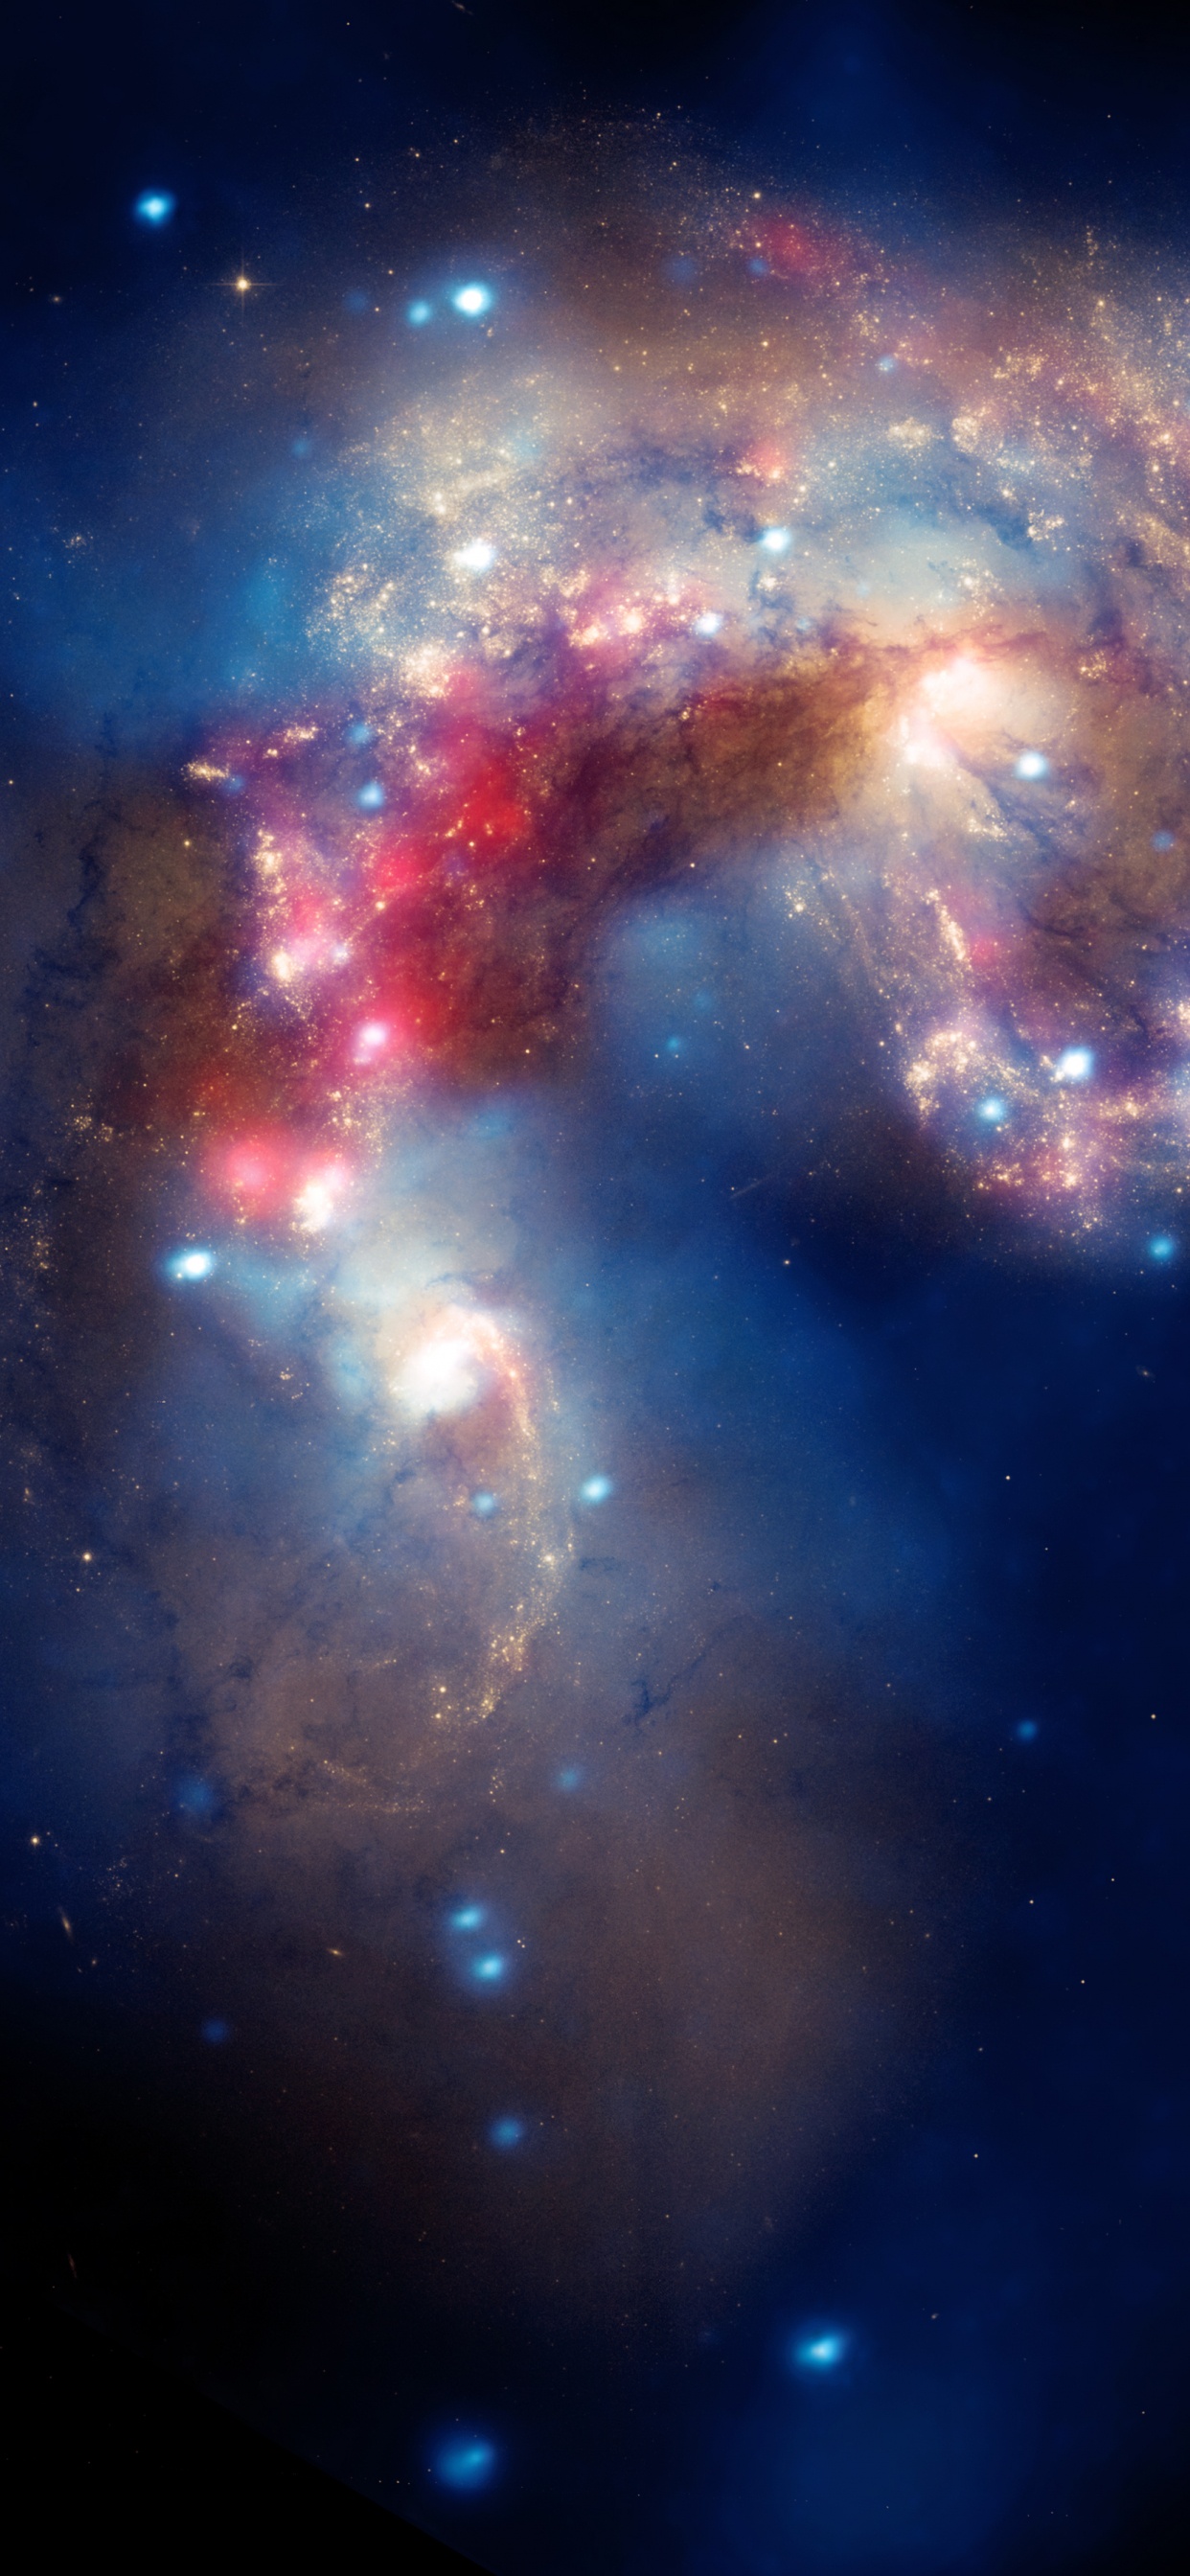 Blue and Red Galaxy Illustration. Wallpaper in 1242x2688 Resolution